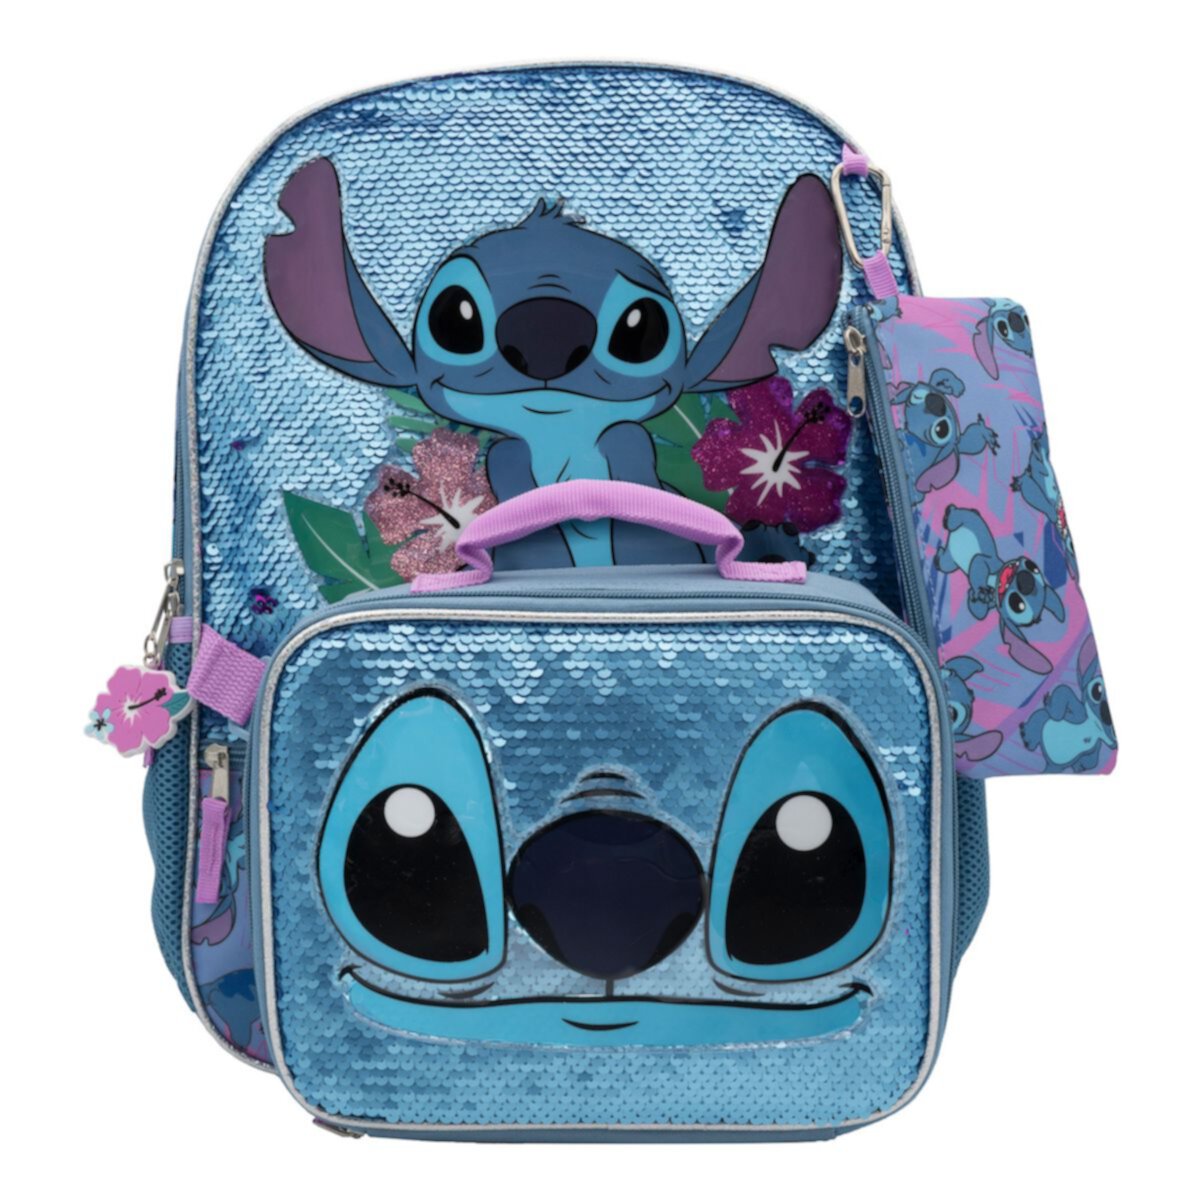 Disney's Lilo & Stitch 5-Piece Stitch Backpack Set Licensed Character